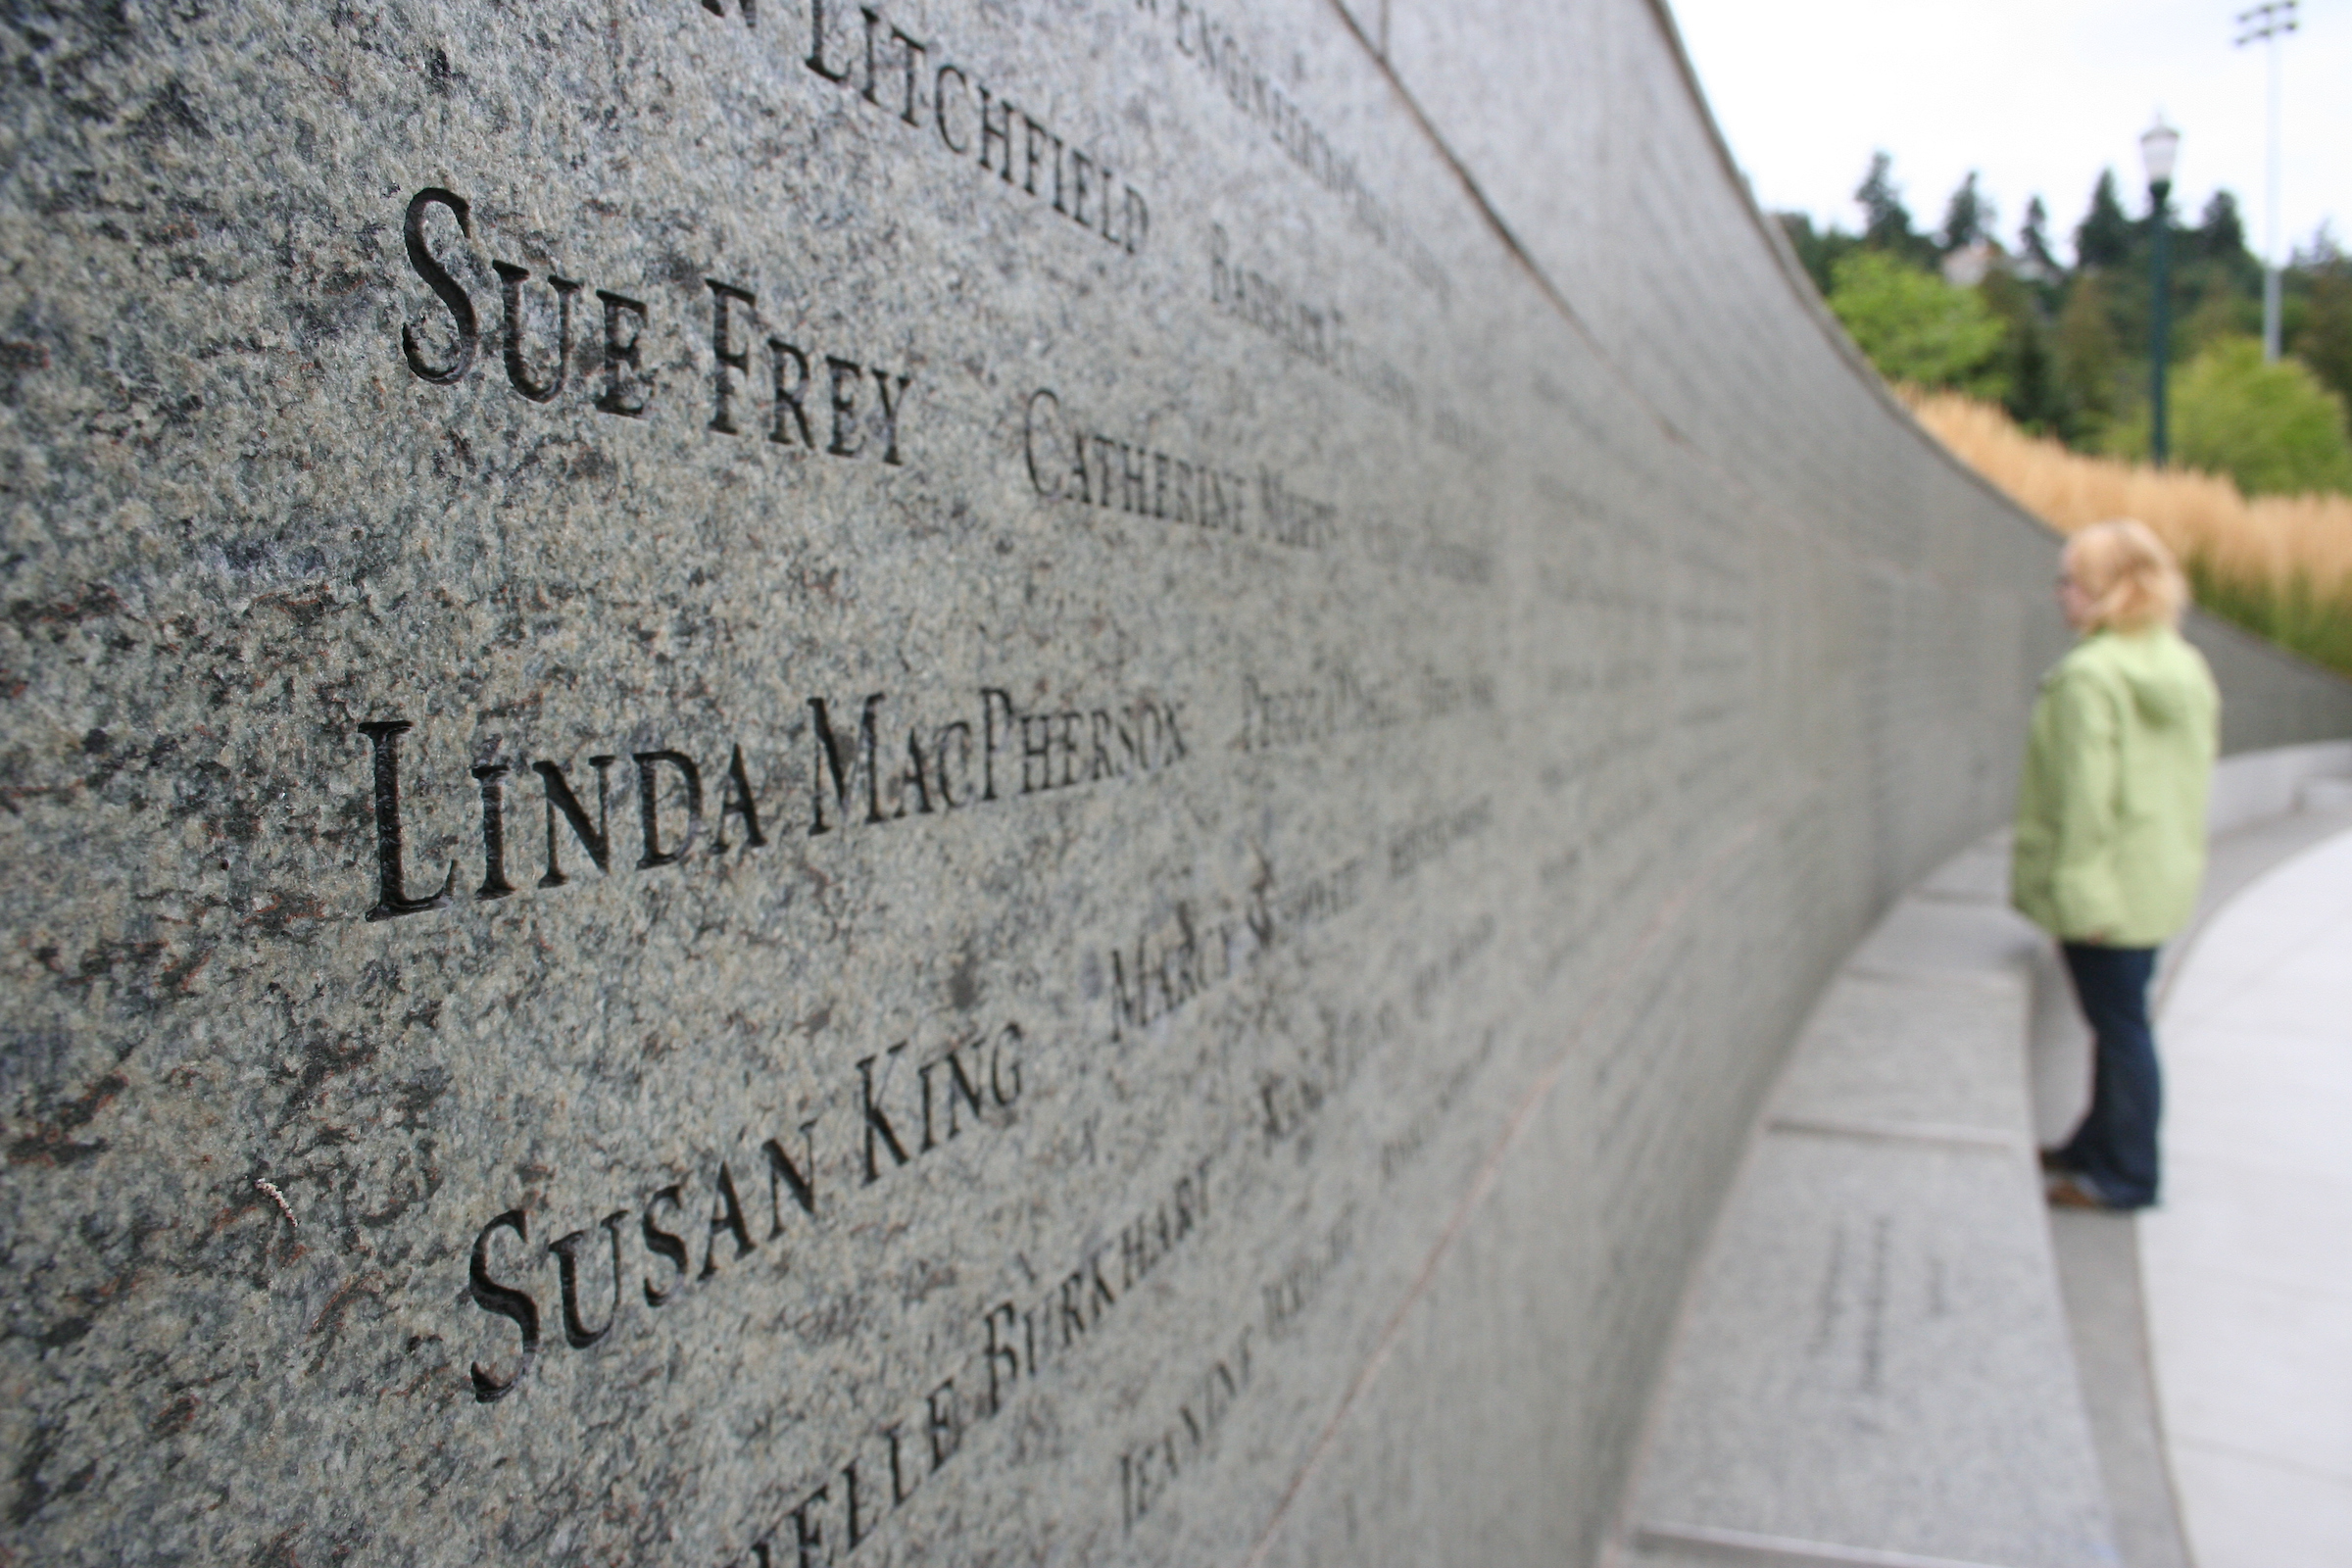 Close up of stone wall with engraved names and woman in background